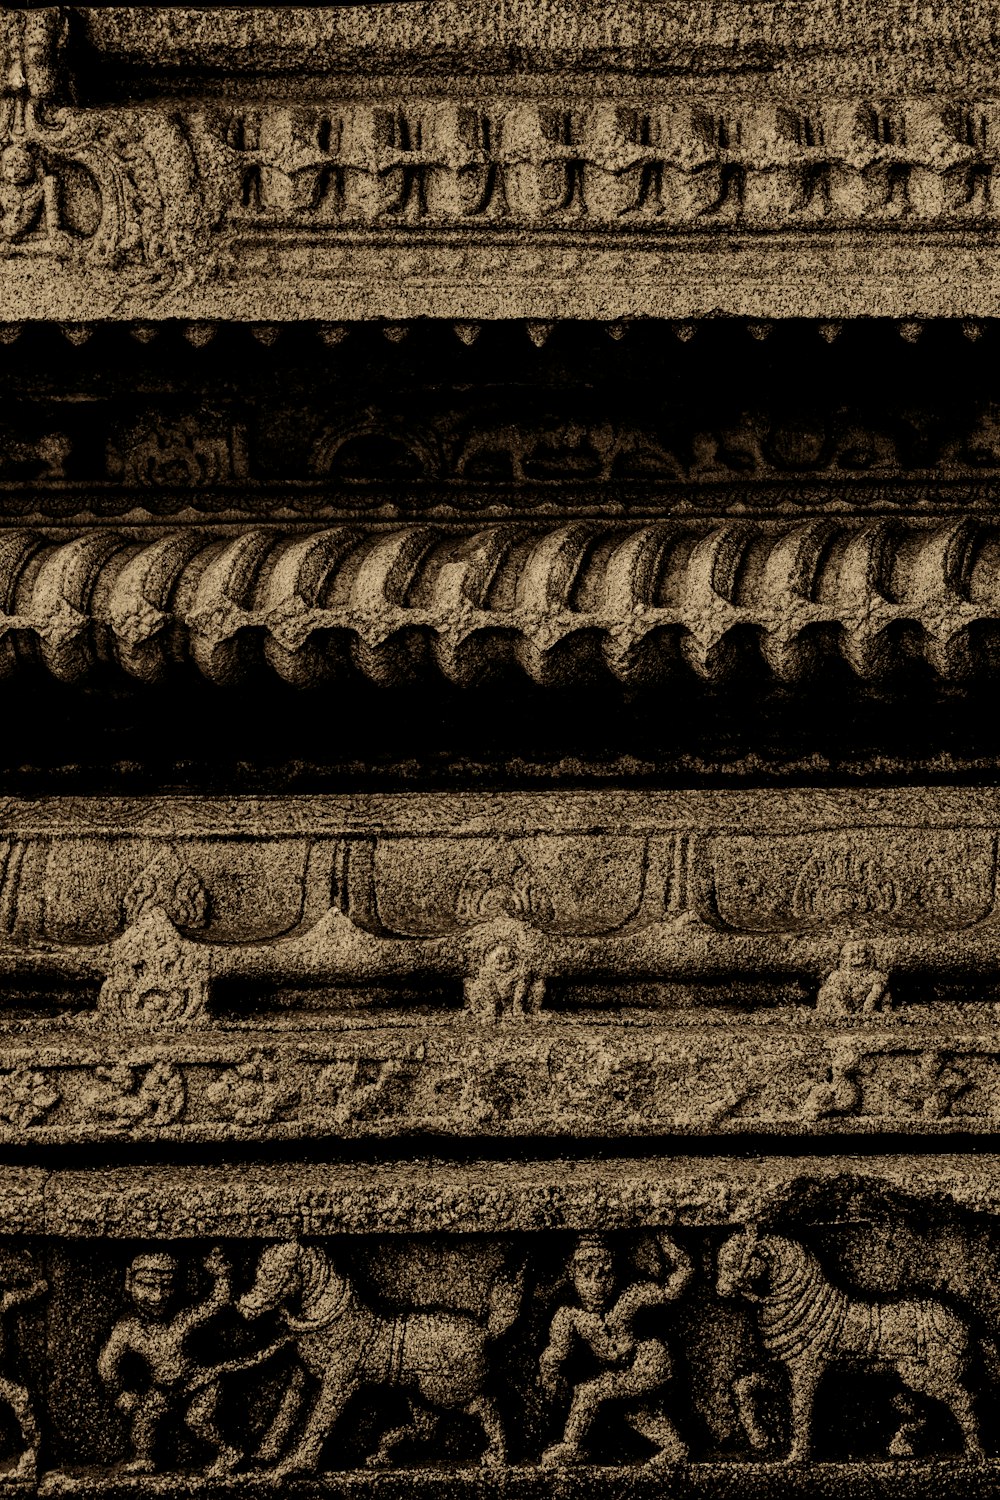 a stone wall with carvings